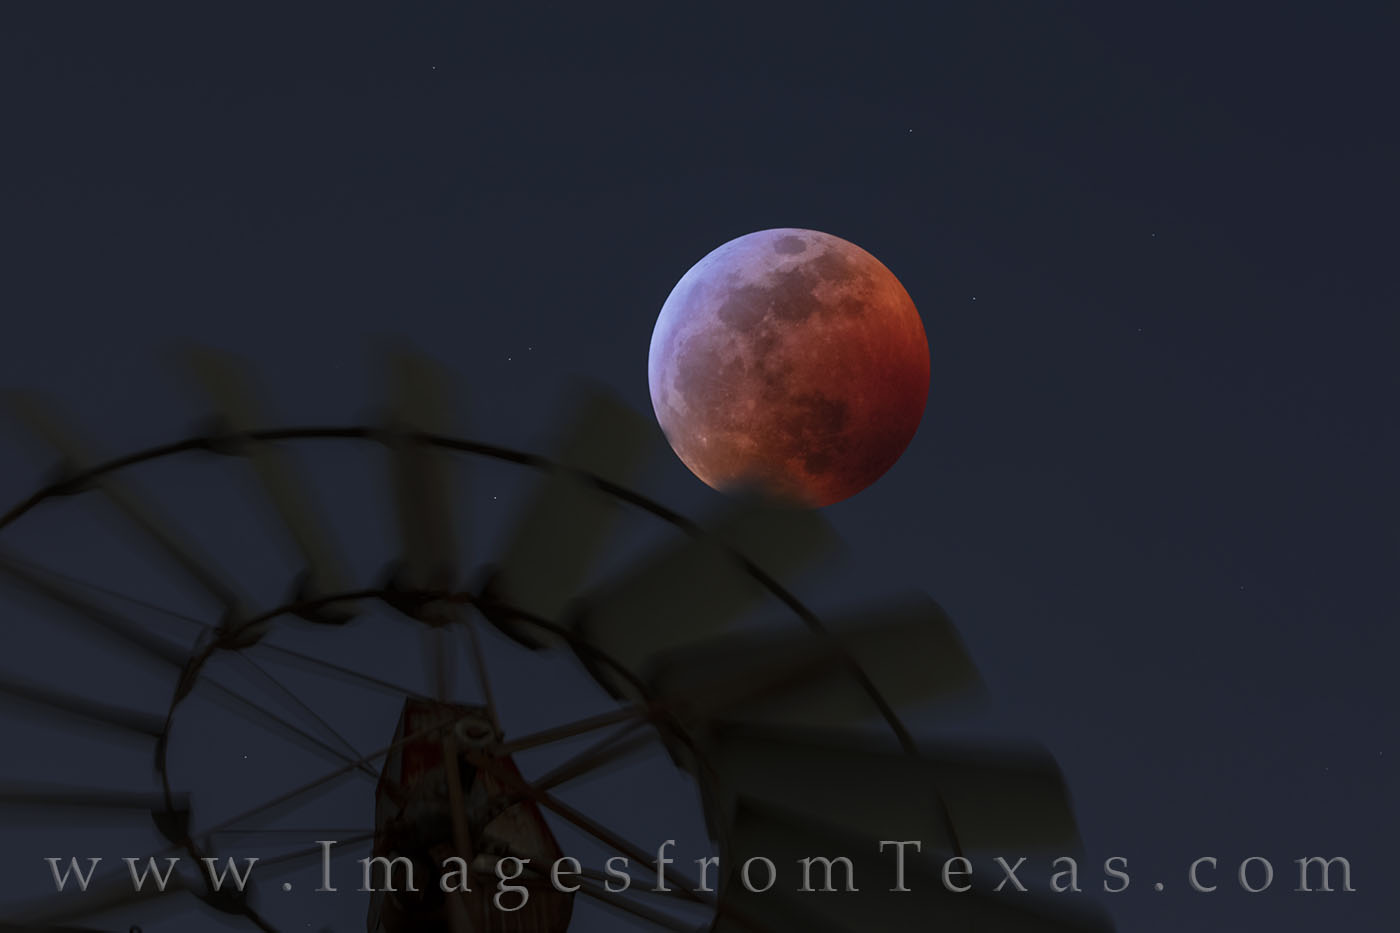 At 11:12pm on January 20, 2019, the Super Blood Wolf Moon reached its peak over the Hill Country, glowing an eerie reddish-orange...